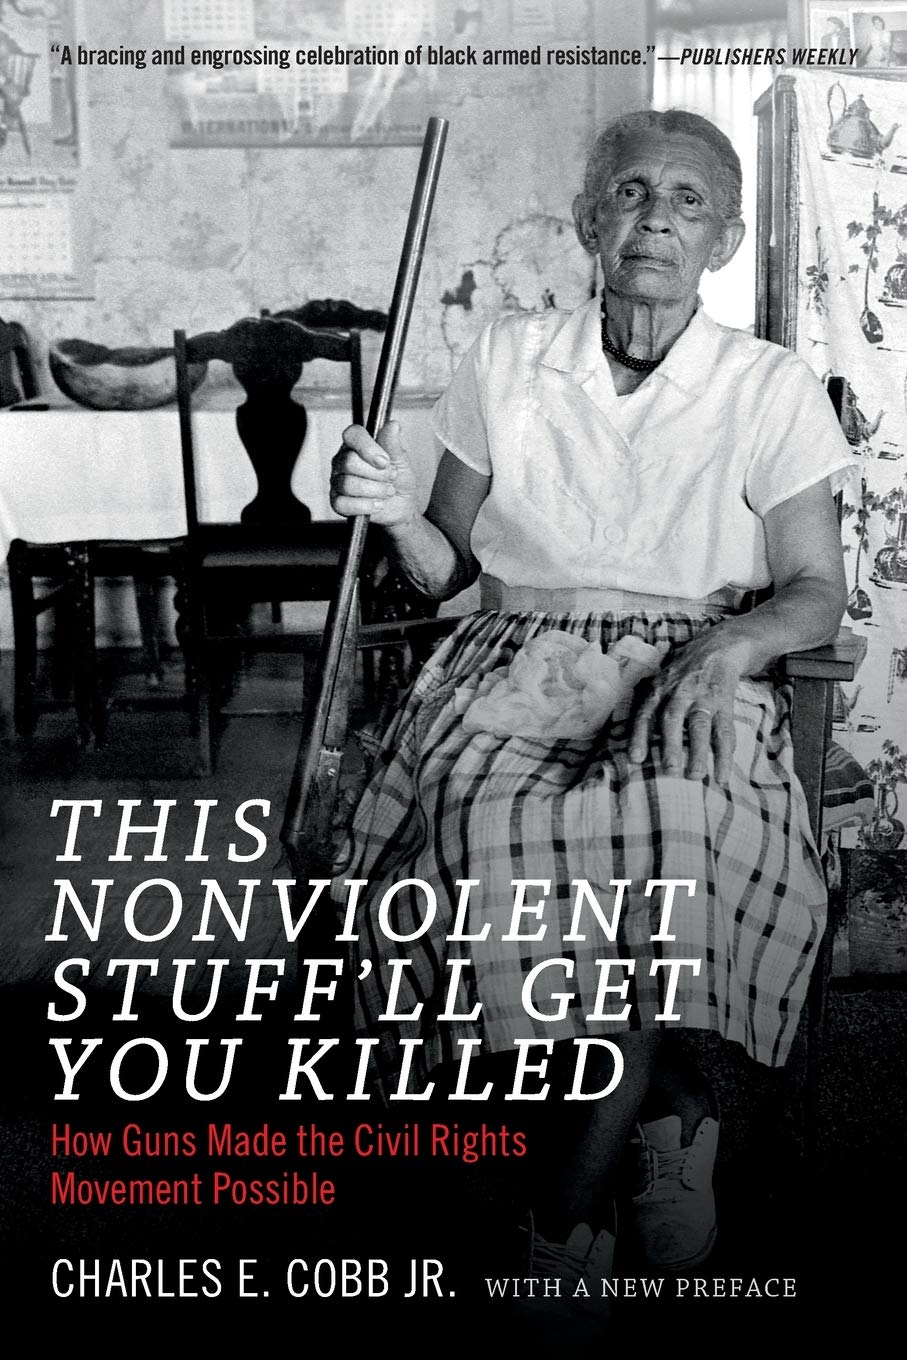 This Nonviolent Stuff'll Get You Killed: How Guns Made the Civil Rights  Movement Possible: Cobb Jr., Charles E.: 9780822361237: Amazon.com: Books